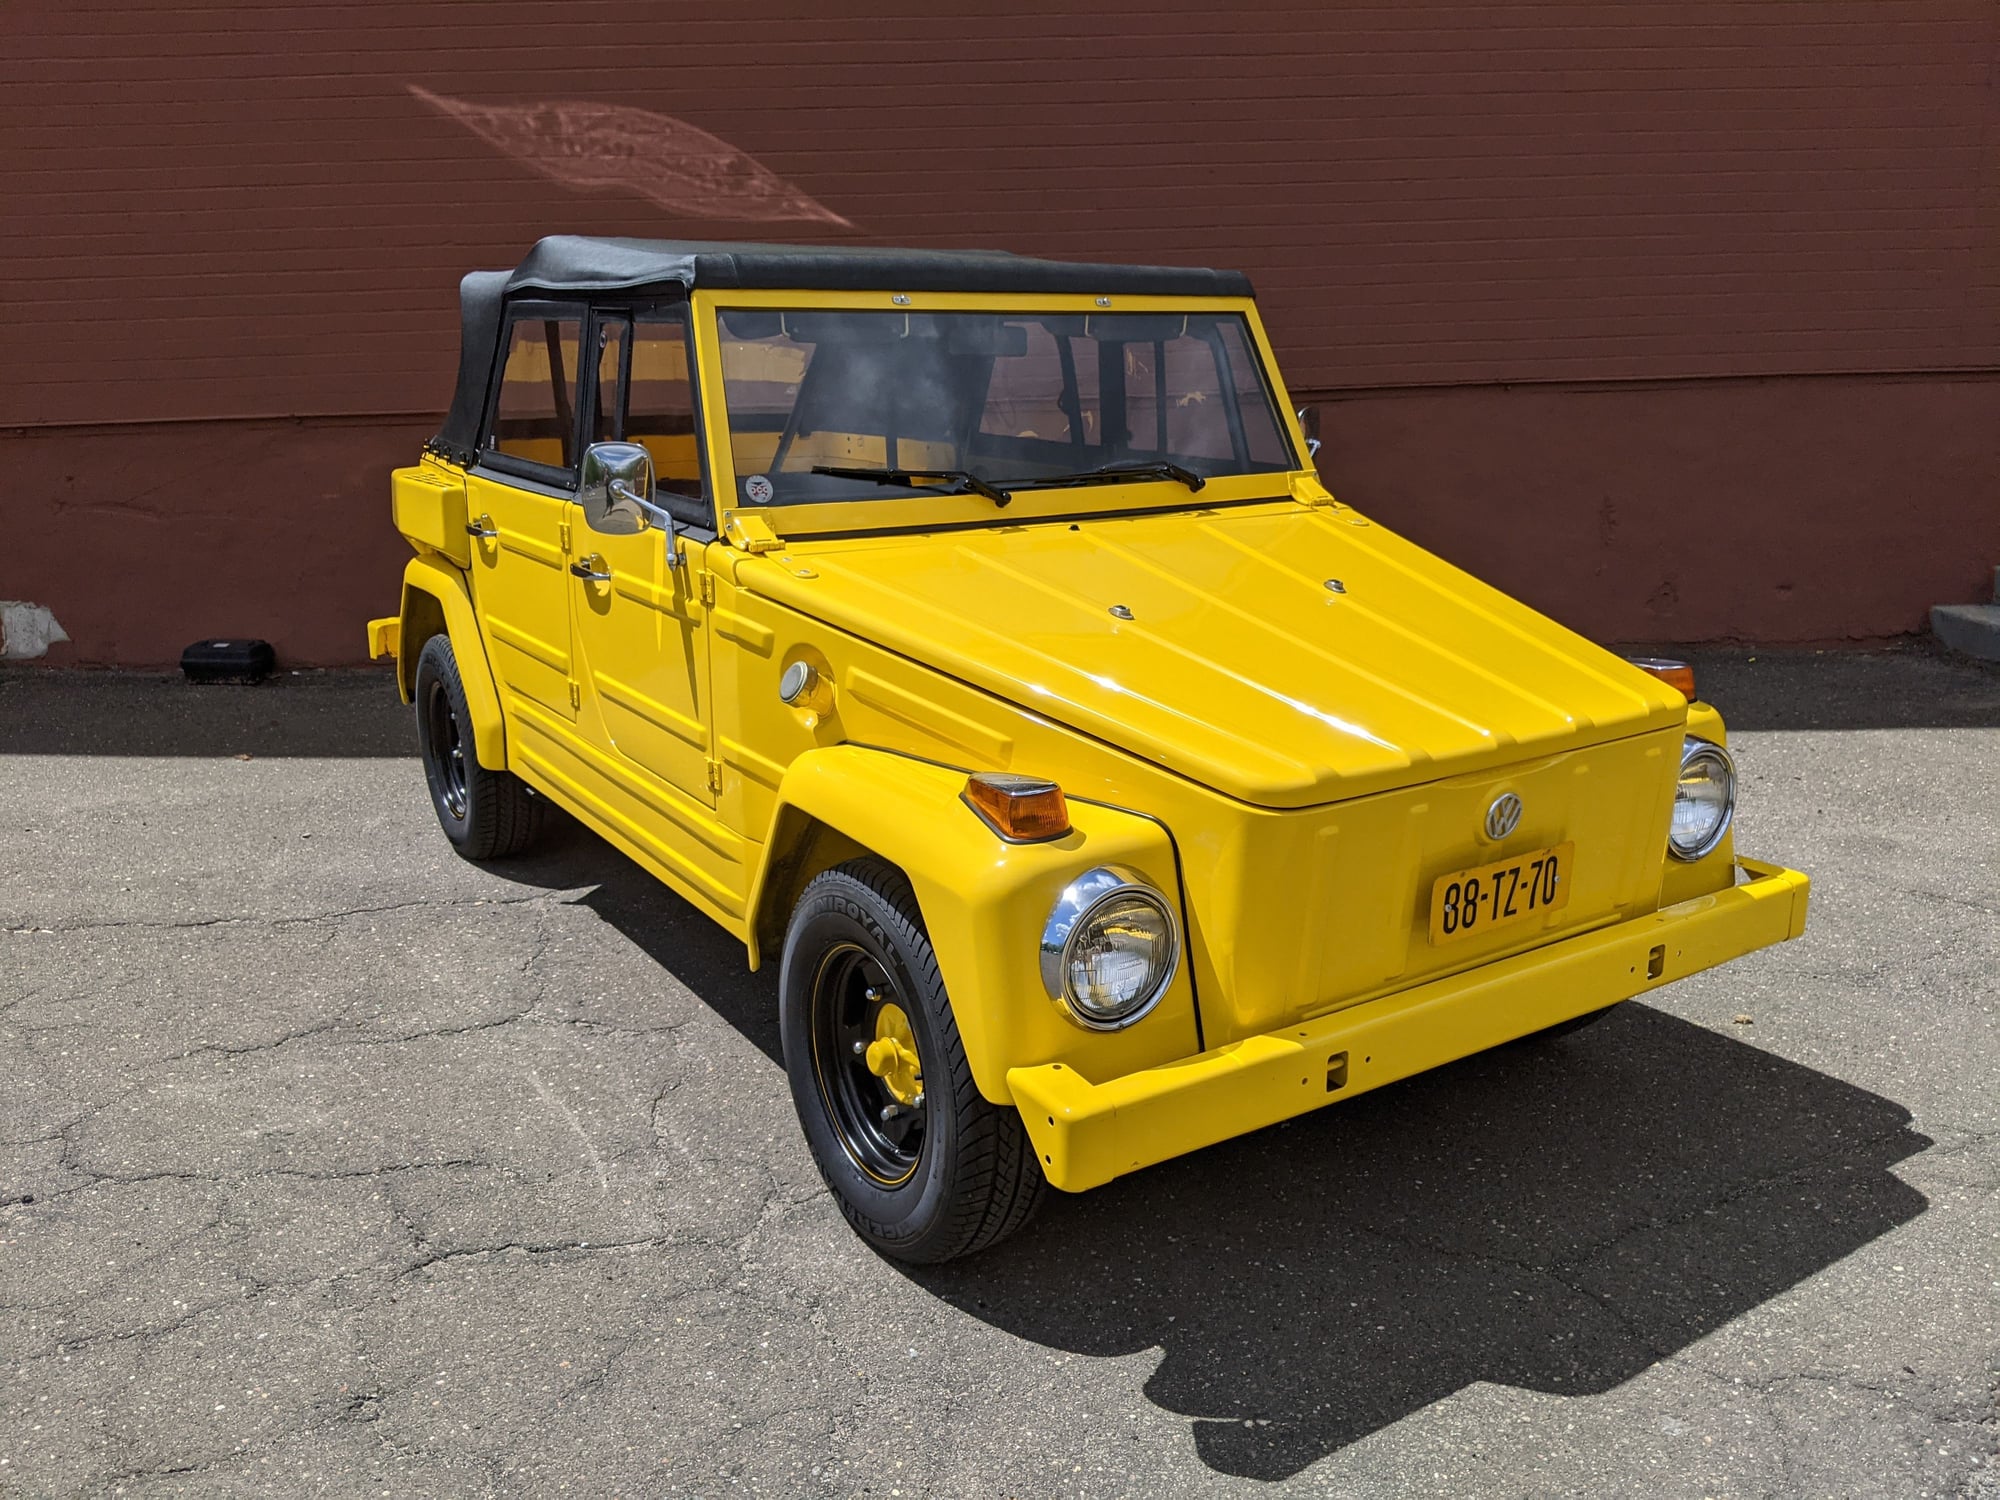 1973 Volkswagen Thing - 1973 Volkswagen Thing - Used - VIN 1832653004 - 90,450 Miles - 4 cyl - 2WD - Manual - Convertible - Yellow - Simsbury, CT 06070, United States